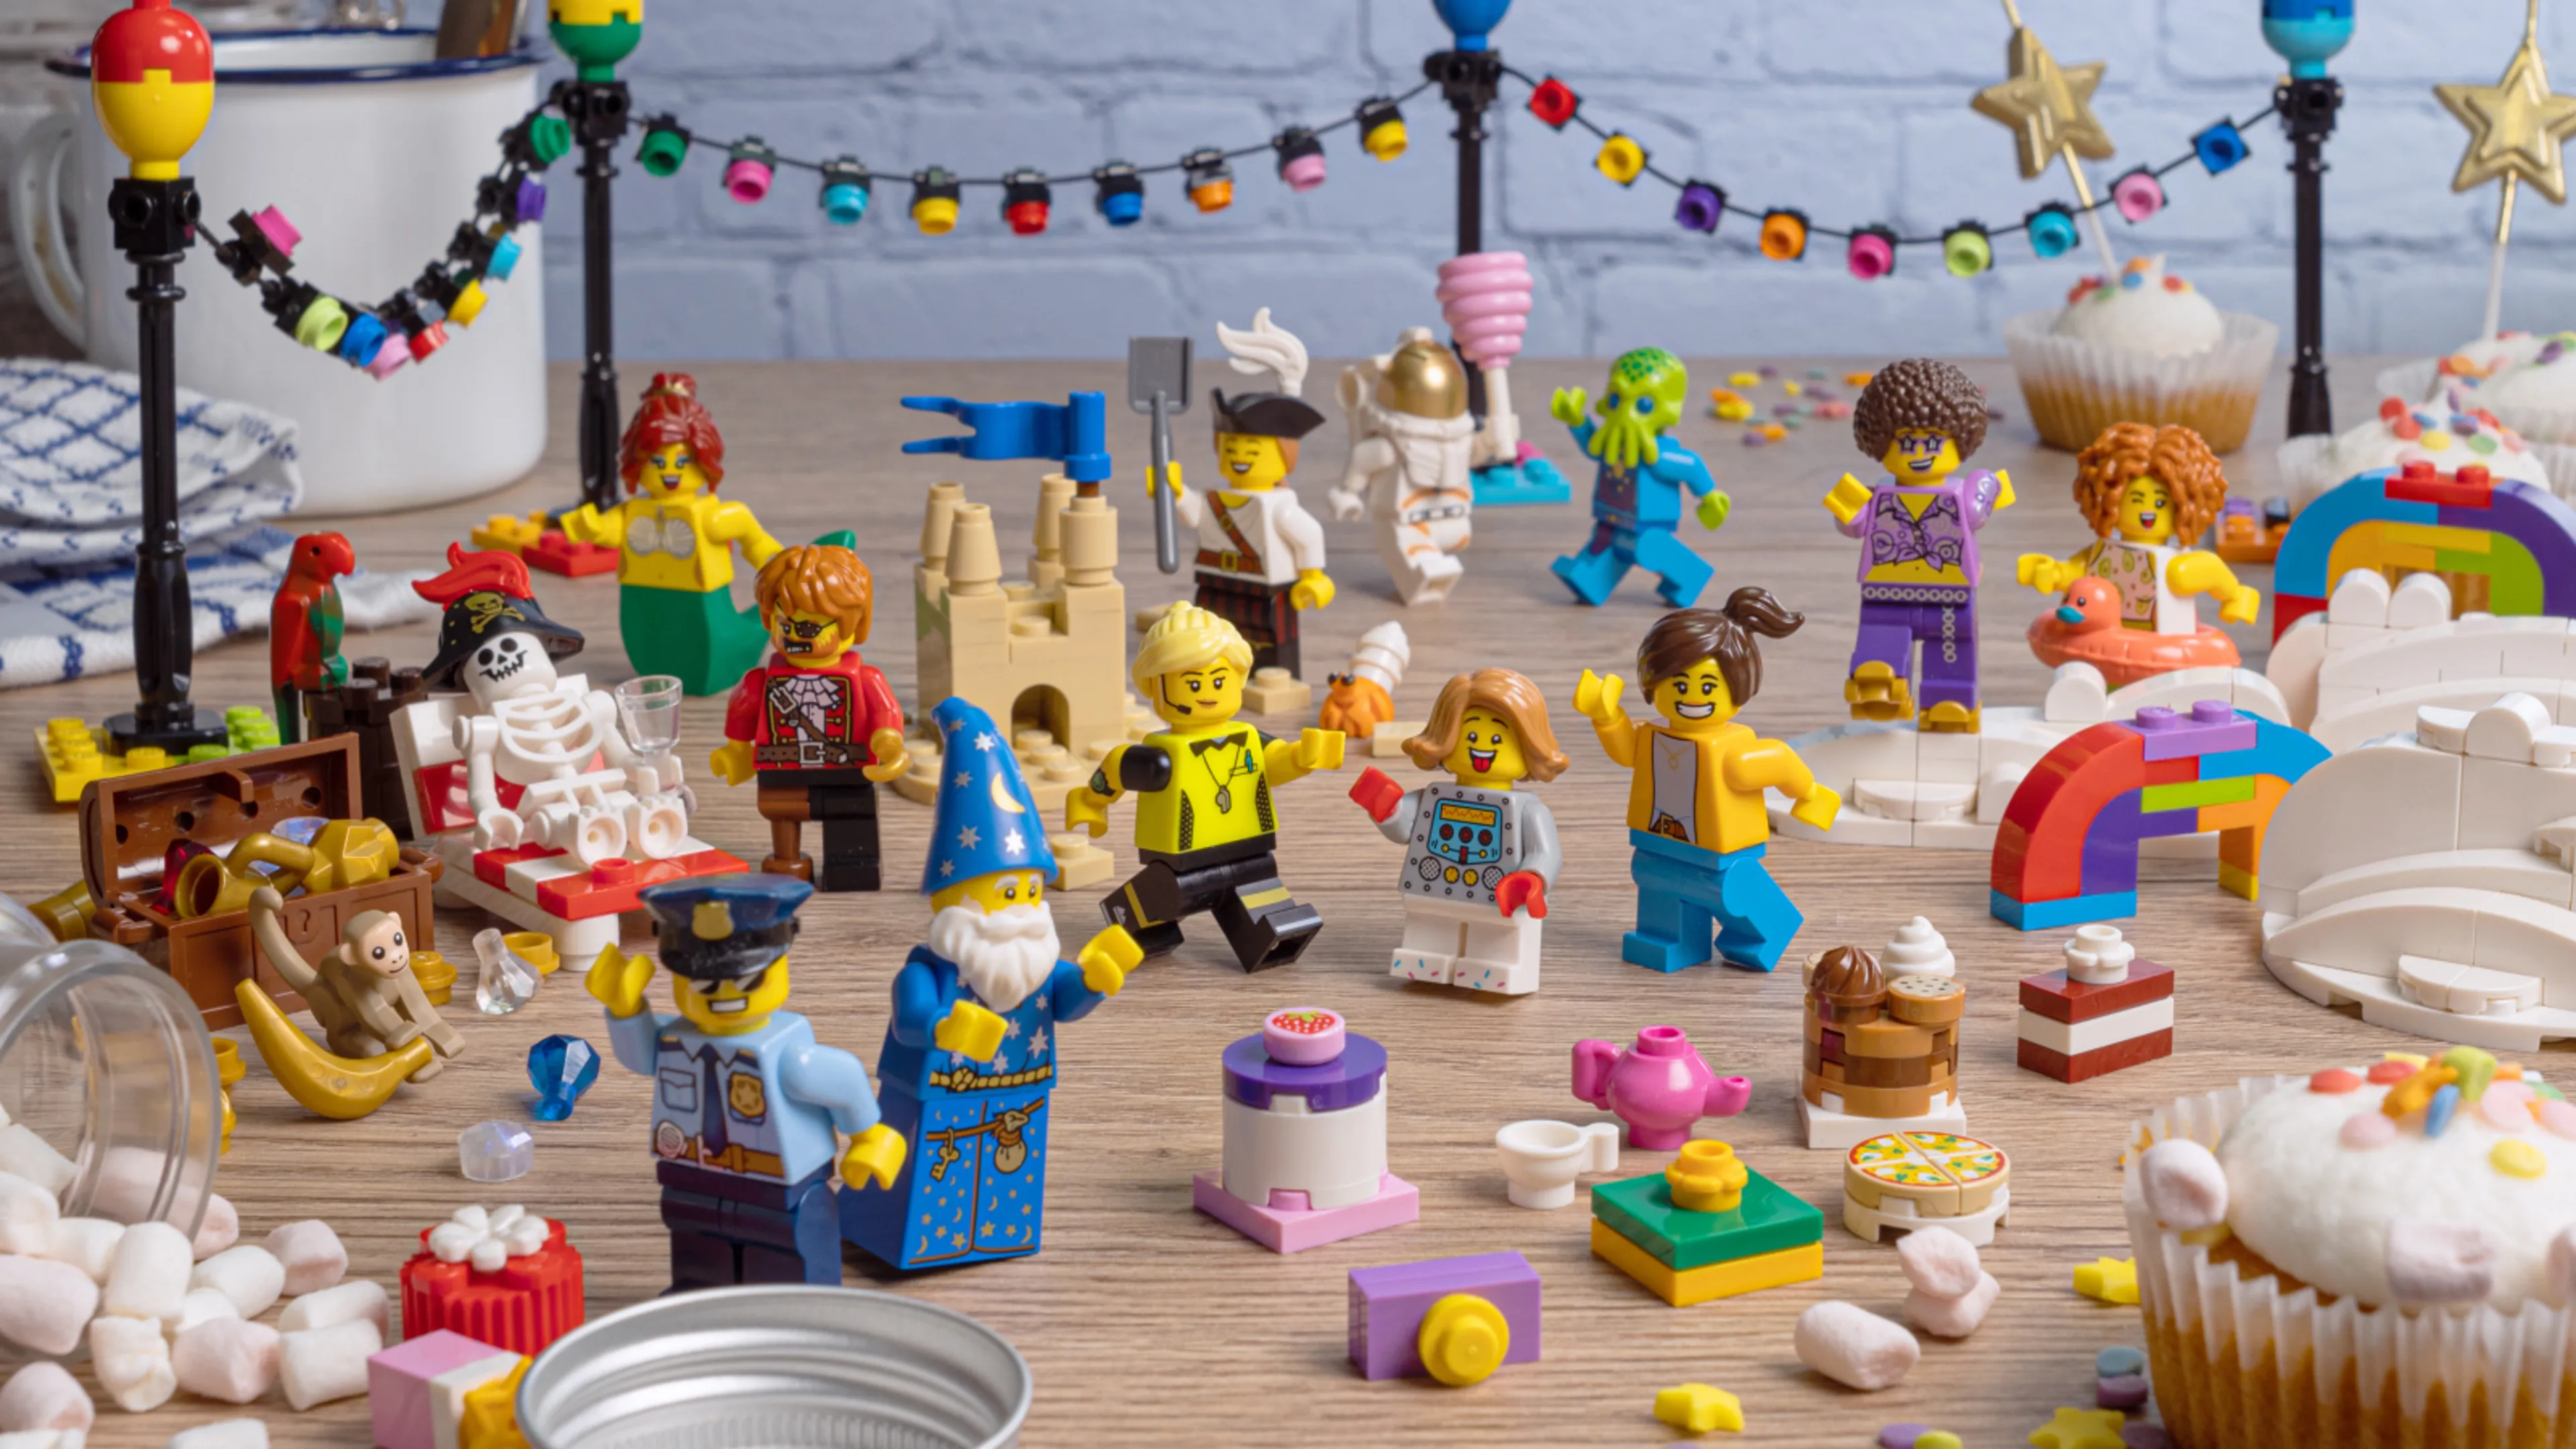 A minifigure birthday party